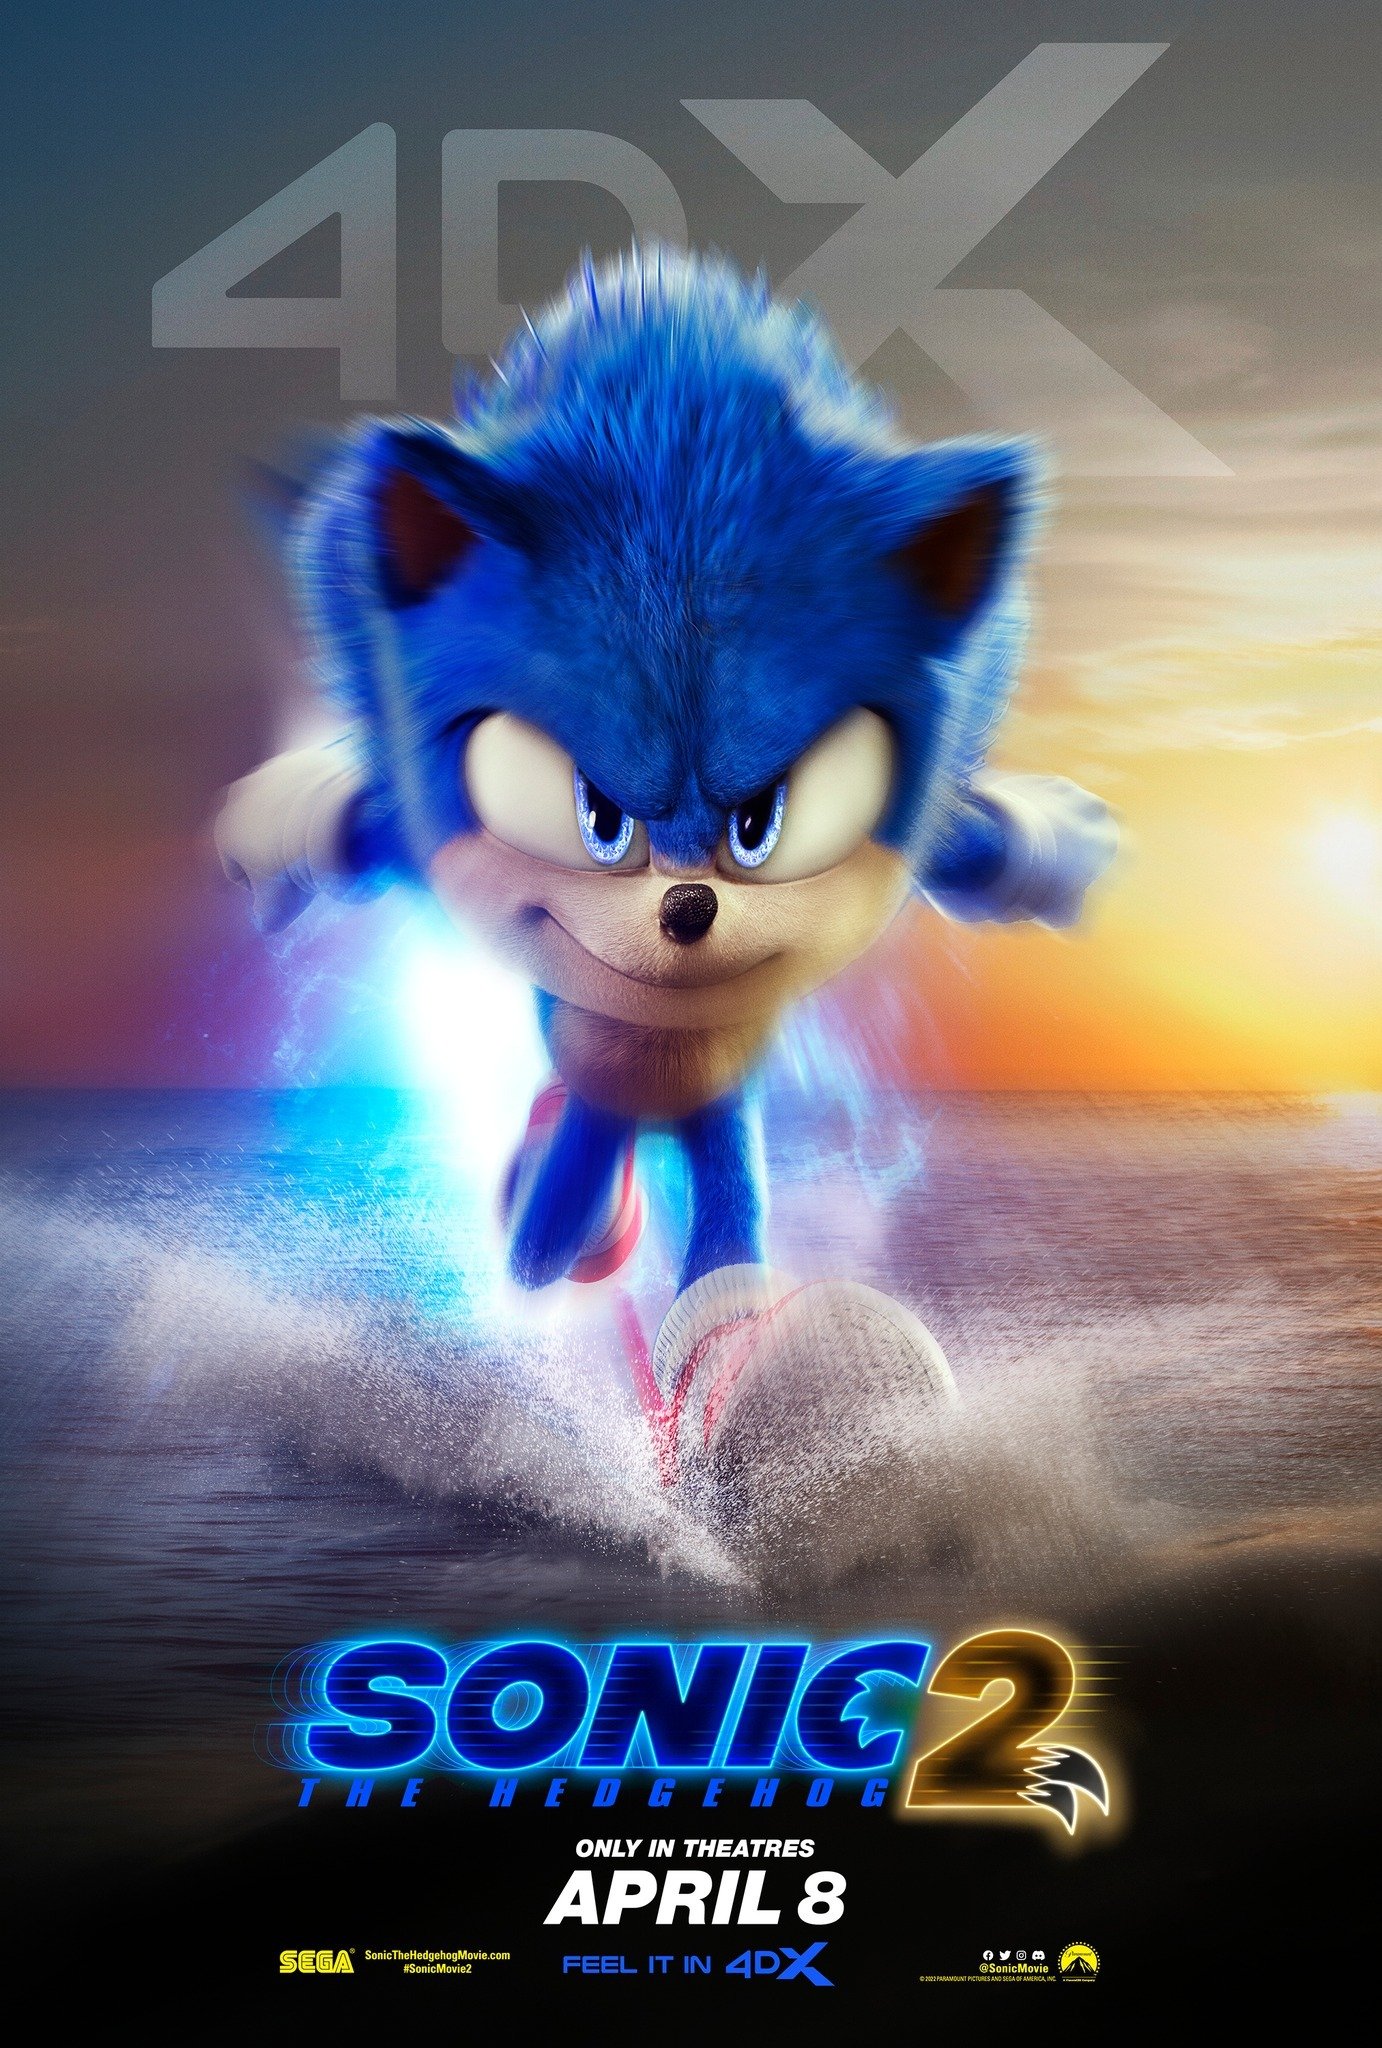 Sonic the Hedgehog 2 Movie Poster ( of 34)